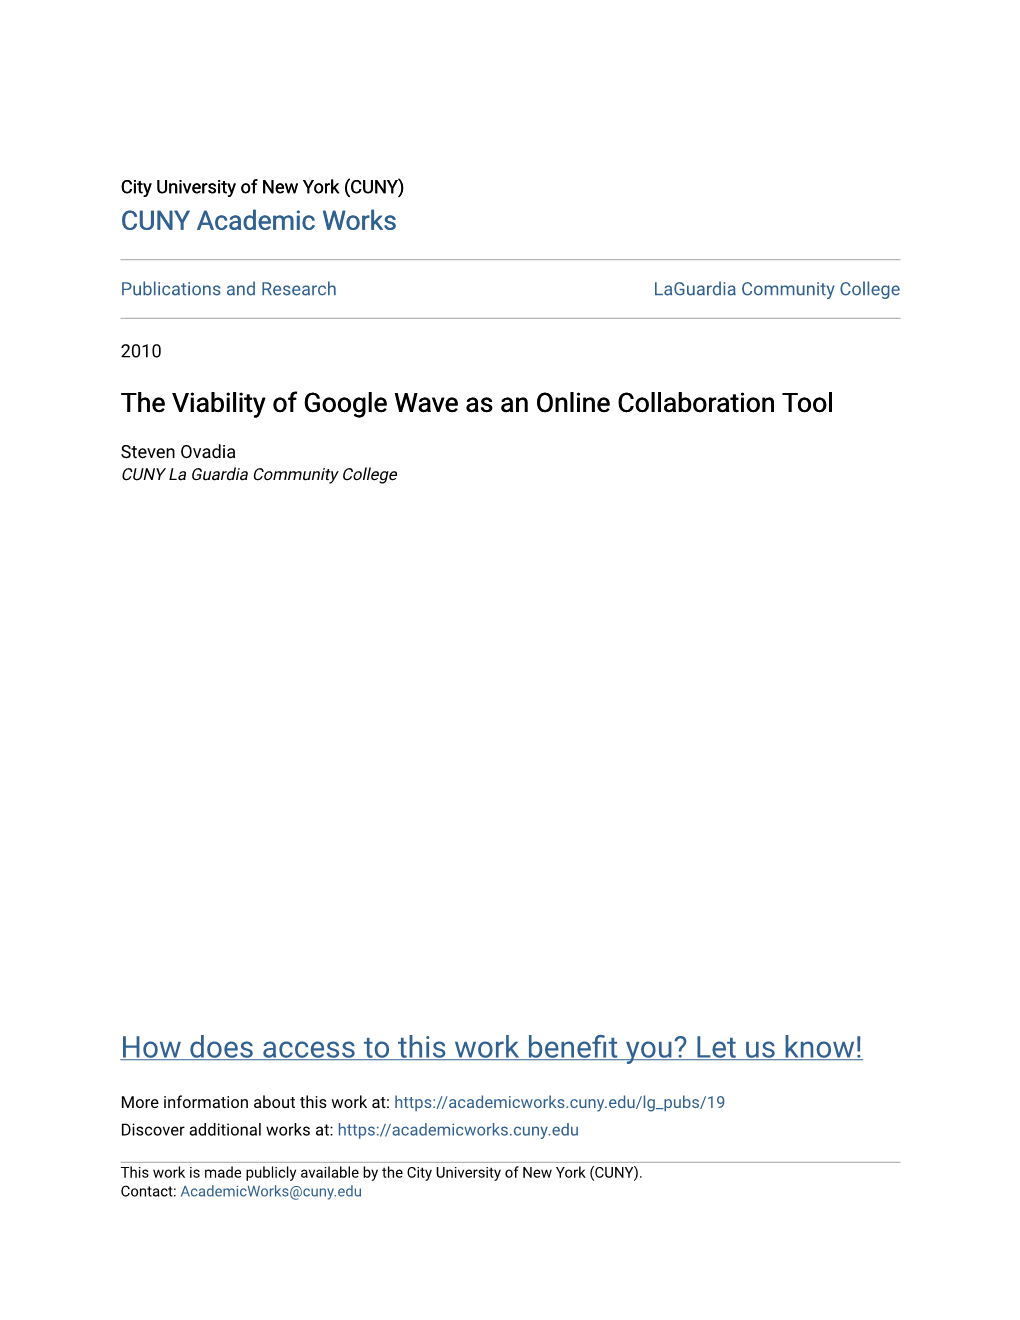 The Viability of Google Wave As an Online Collaboration Tool